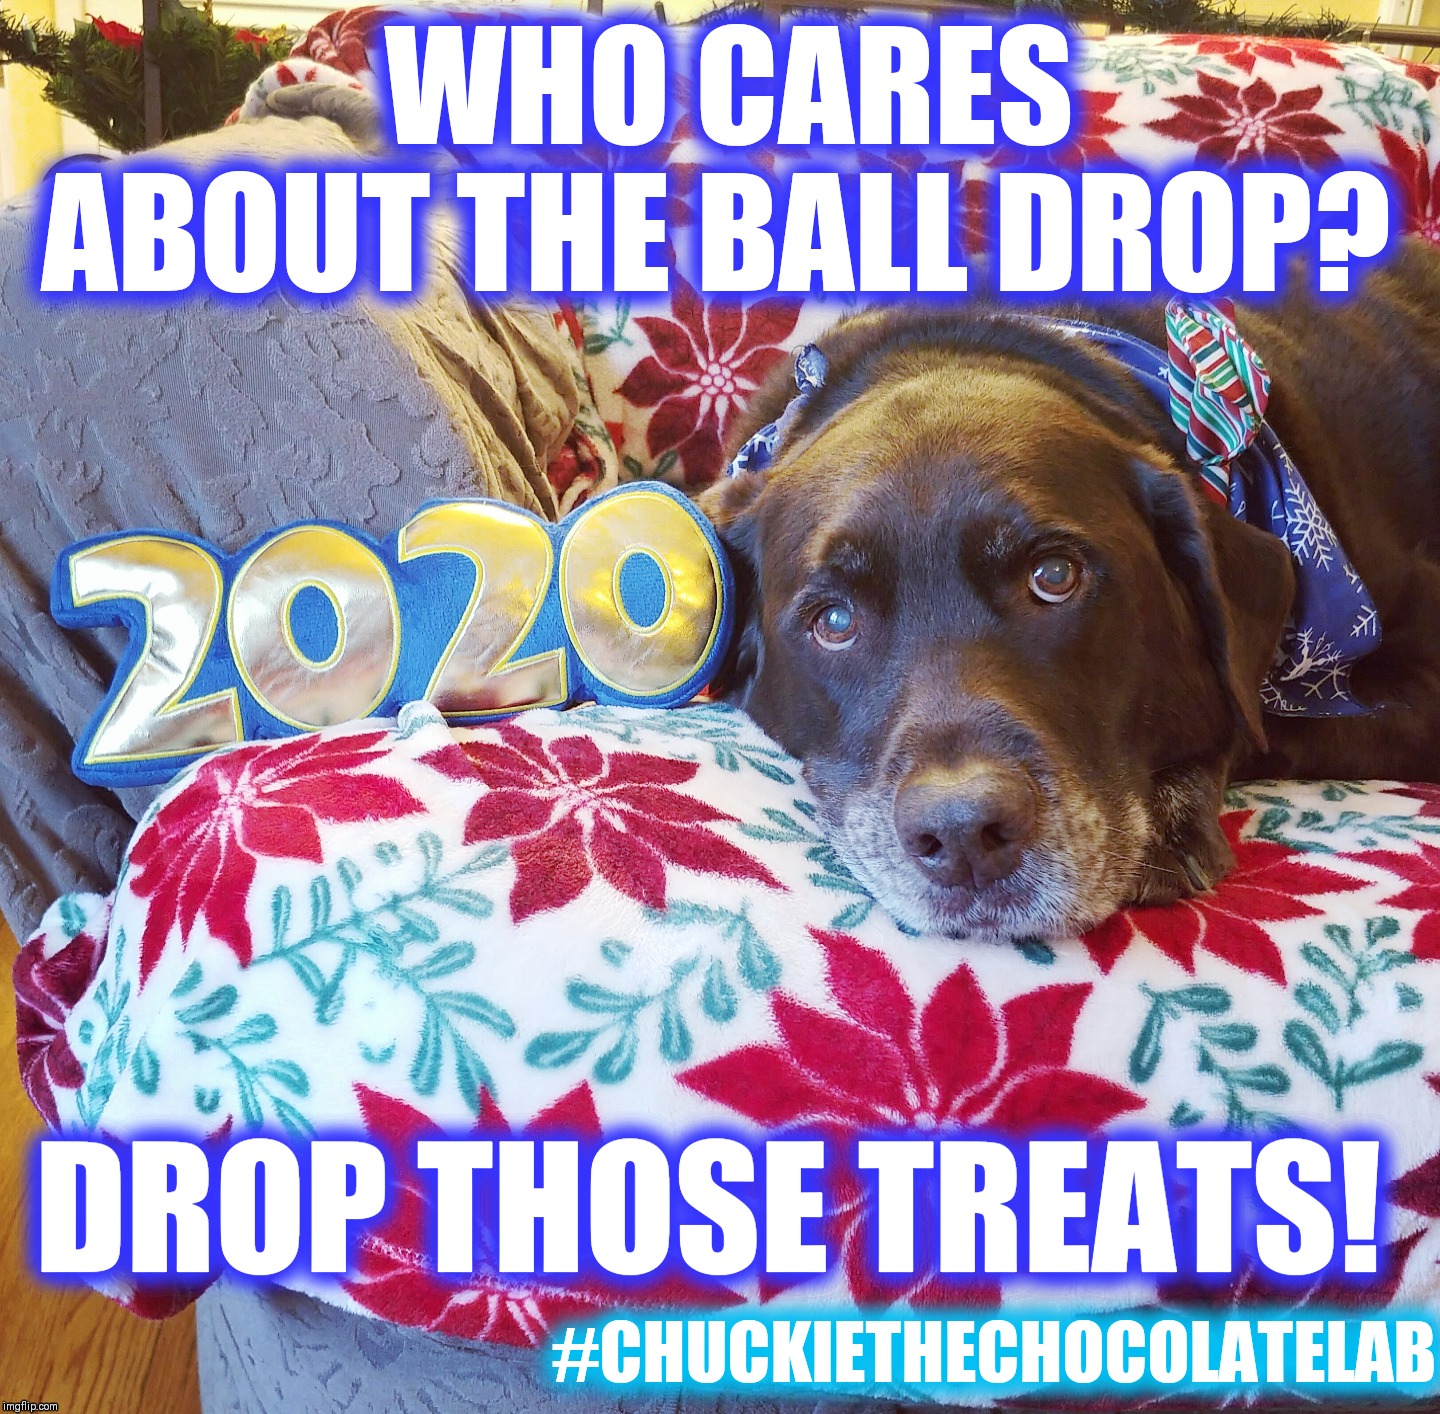 Doggie New Year's | WHO CARES ABOUT THE BALL DROP? DROP THOSE TREATS! #CHUCKIETHECHOCOLATELAB | image tagged in chuckie the chocolate lab,dogs,new years eve,new year,funny,memes | made w/ Imgflip meme maker